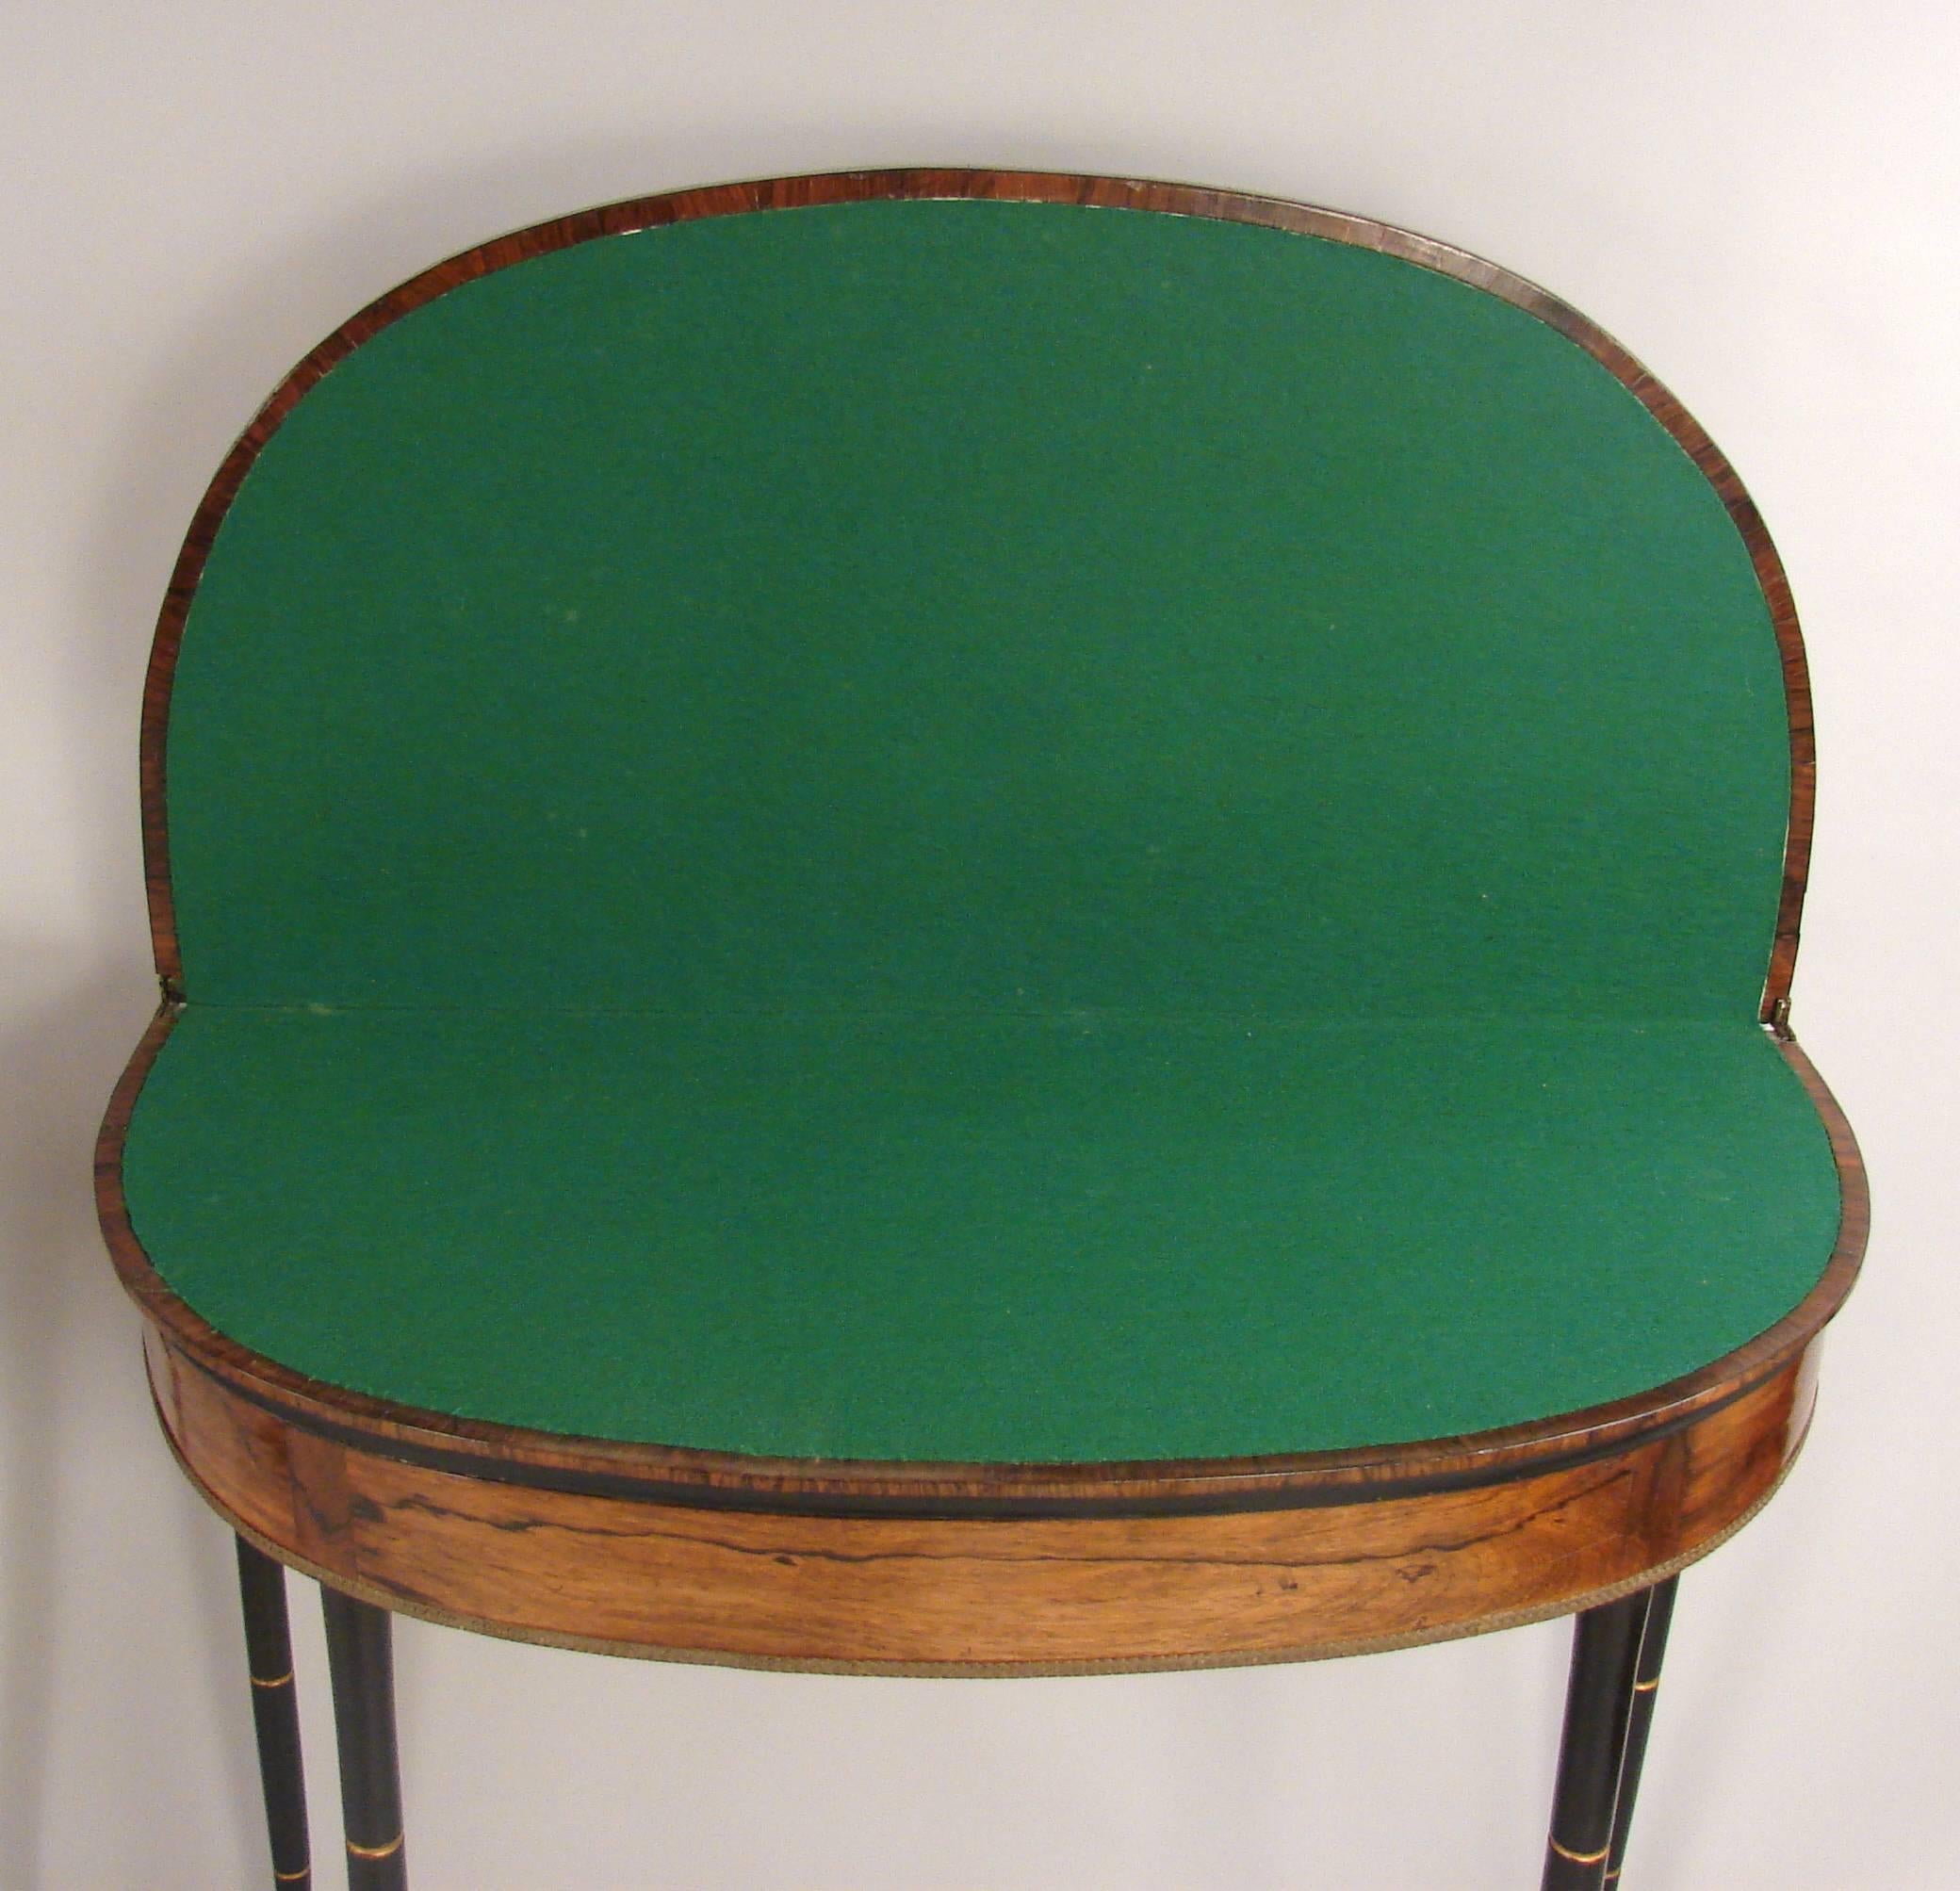 An elegant and stylish pair of English Regency period rosewood flip-top games tables, the interiors lined in green felt, each with ebonized faux bamboo legs and applied brass decorations to the aprons, circa 1815. Restored.